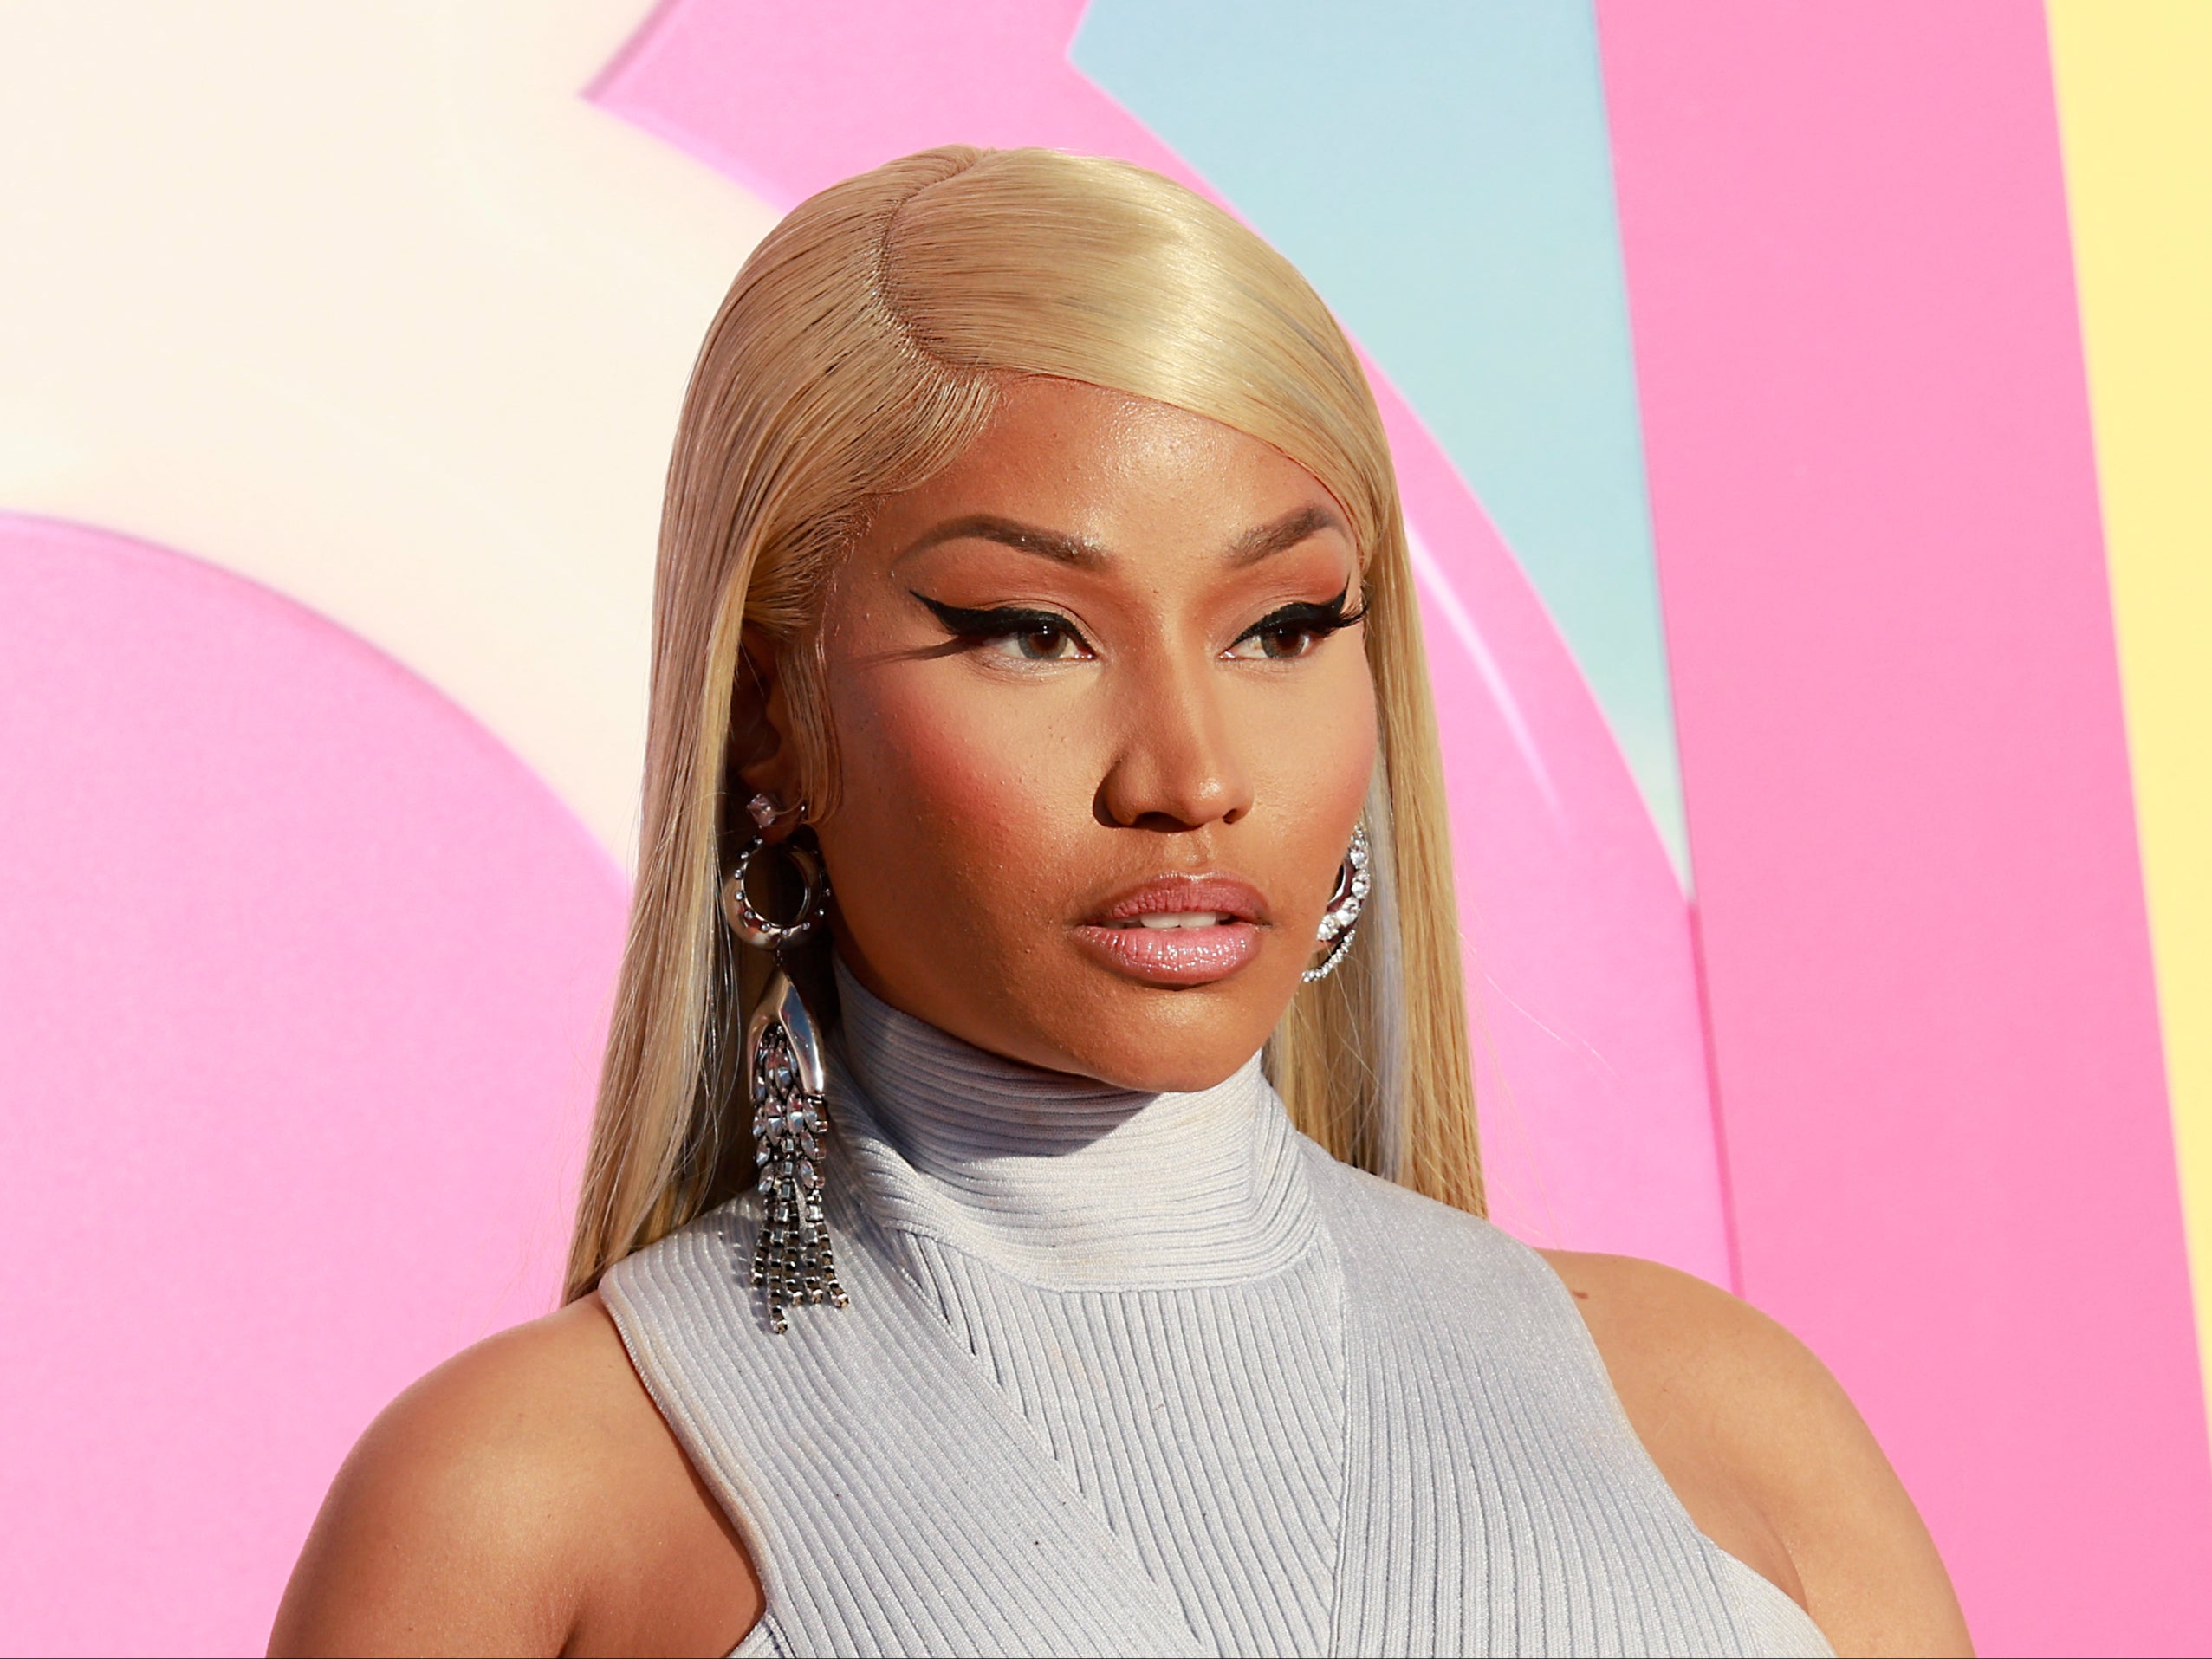 Nicki Minaj appeared to make a dig at Megan Thee Stallion in her song ‘Seeing Green’